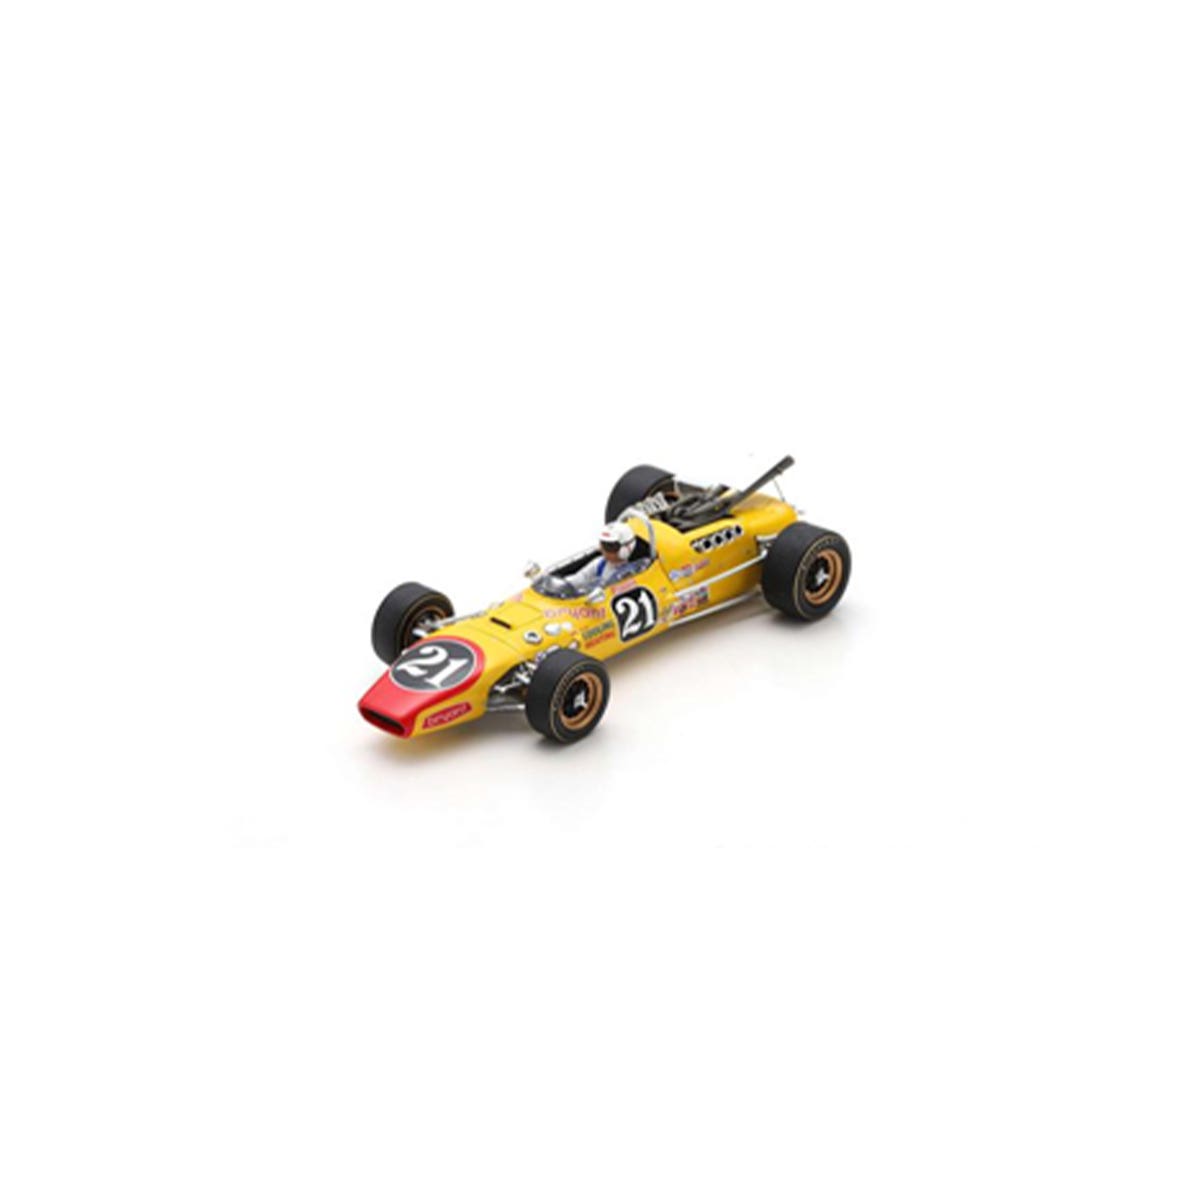 Vollstedt No.21 Indy 500 1967 - Cale Yarborough - 1:43 Scale Resin Model Car